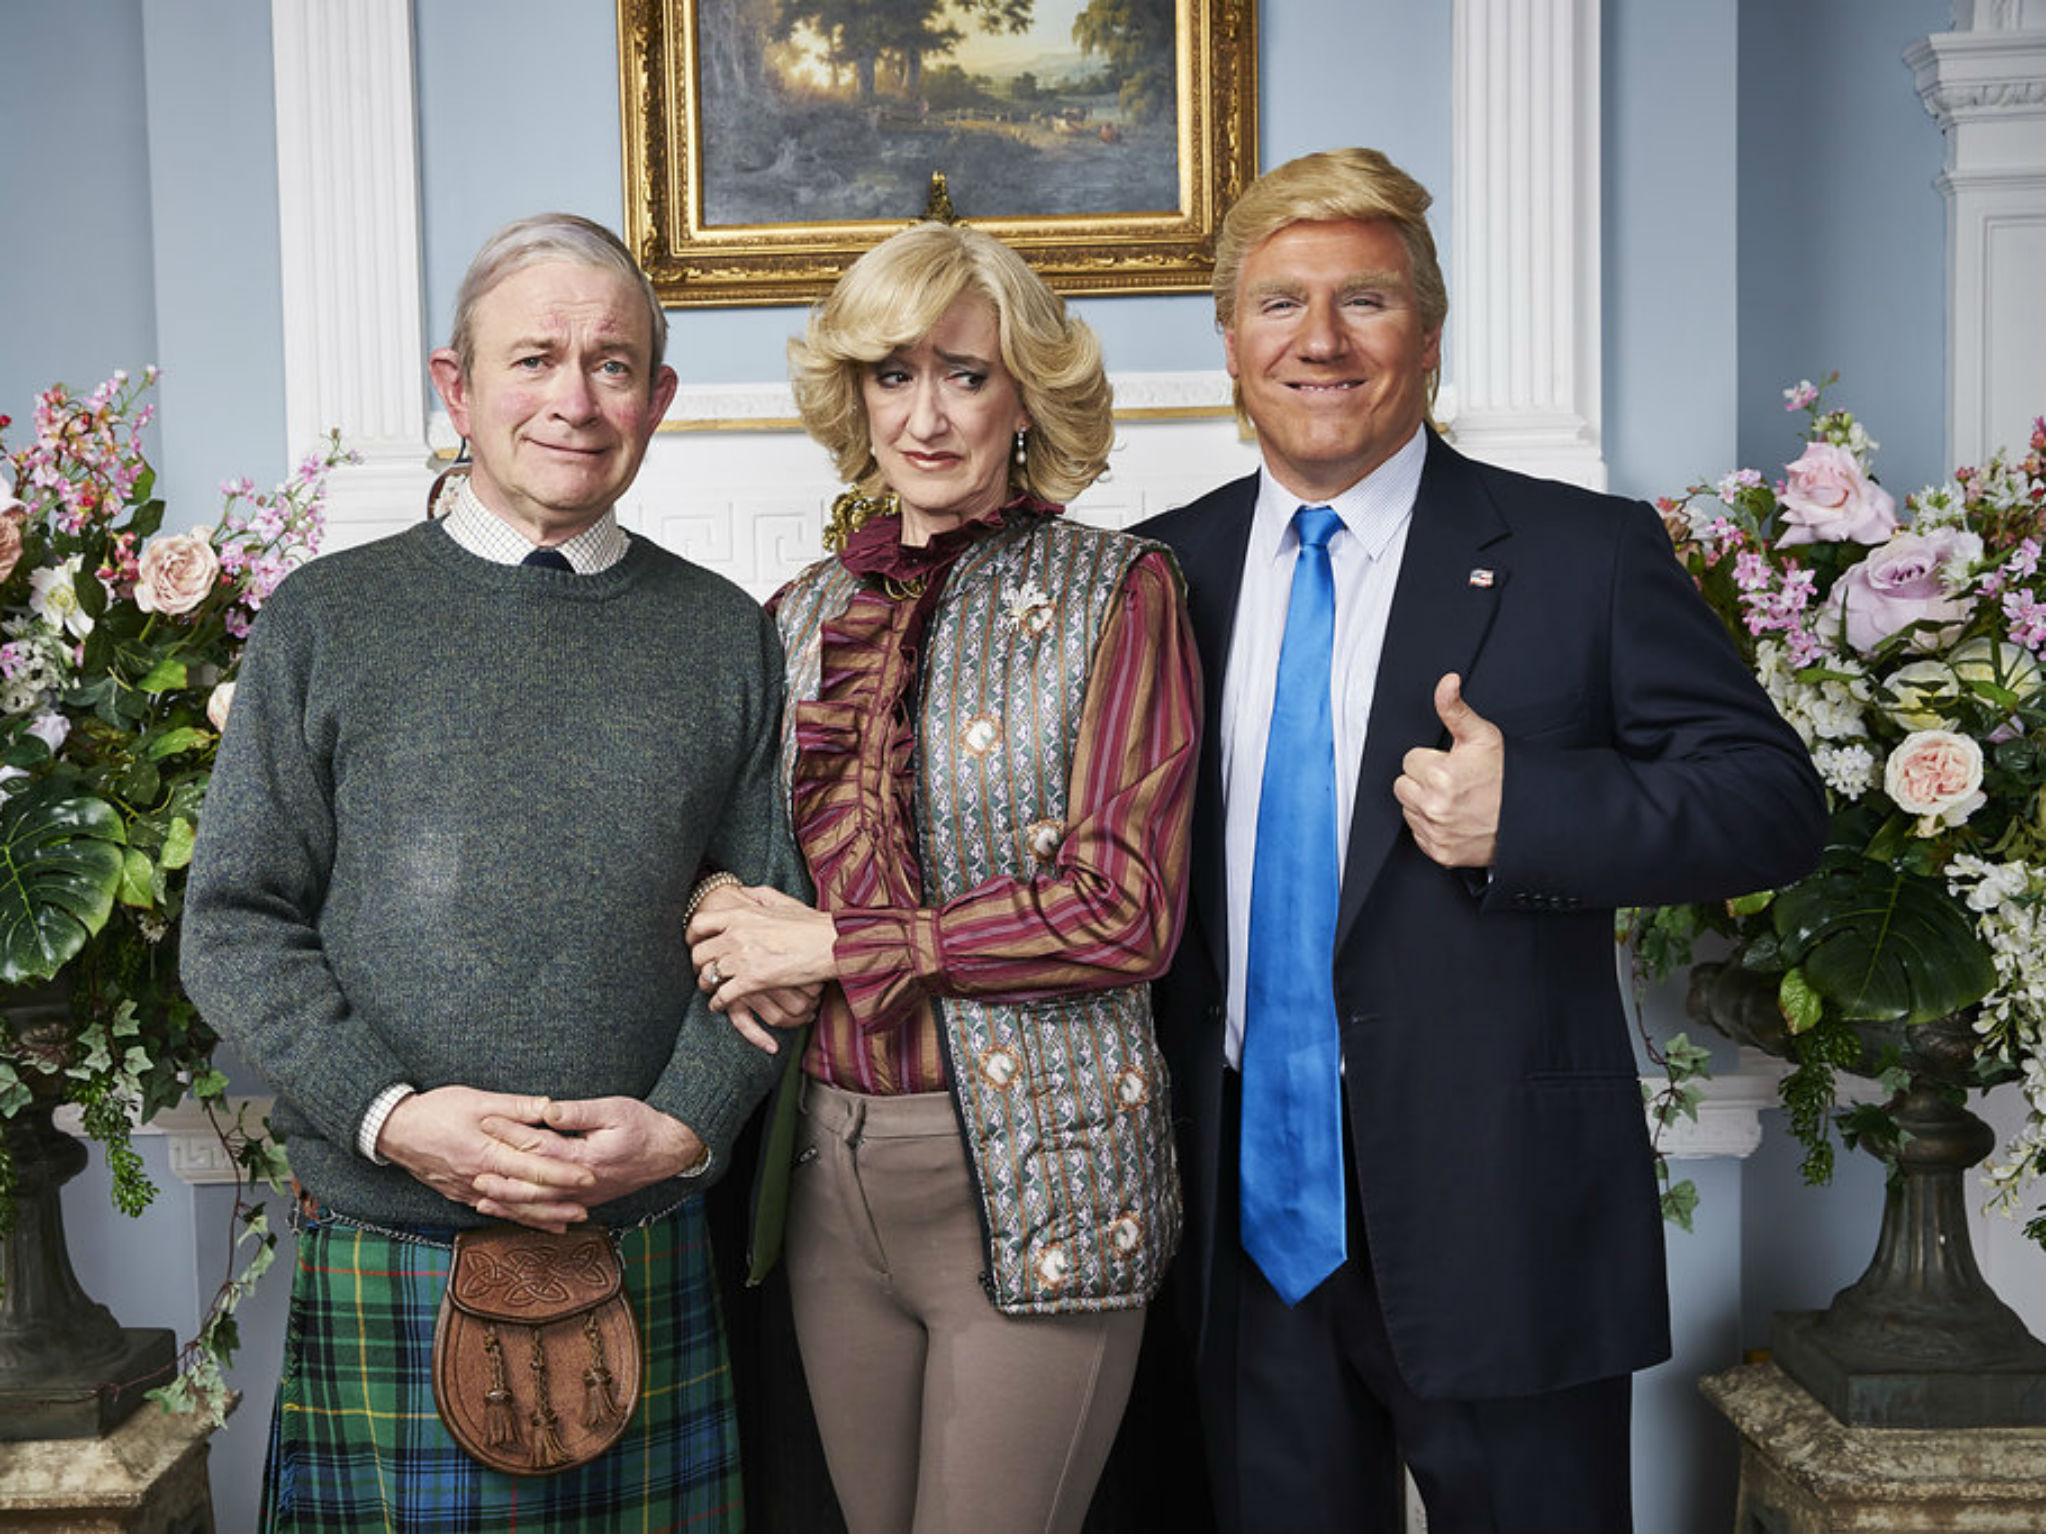 The US actor Cory Johnson (right) will play Donald Trump in the new series of 'The Windsors' with Harry Enfield (Prince Charles) and Haydn Gwynne (Camilla)